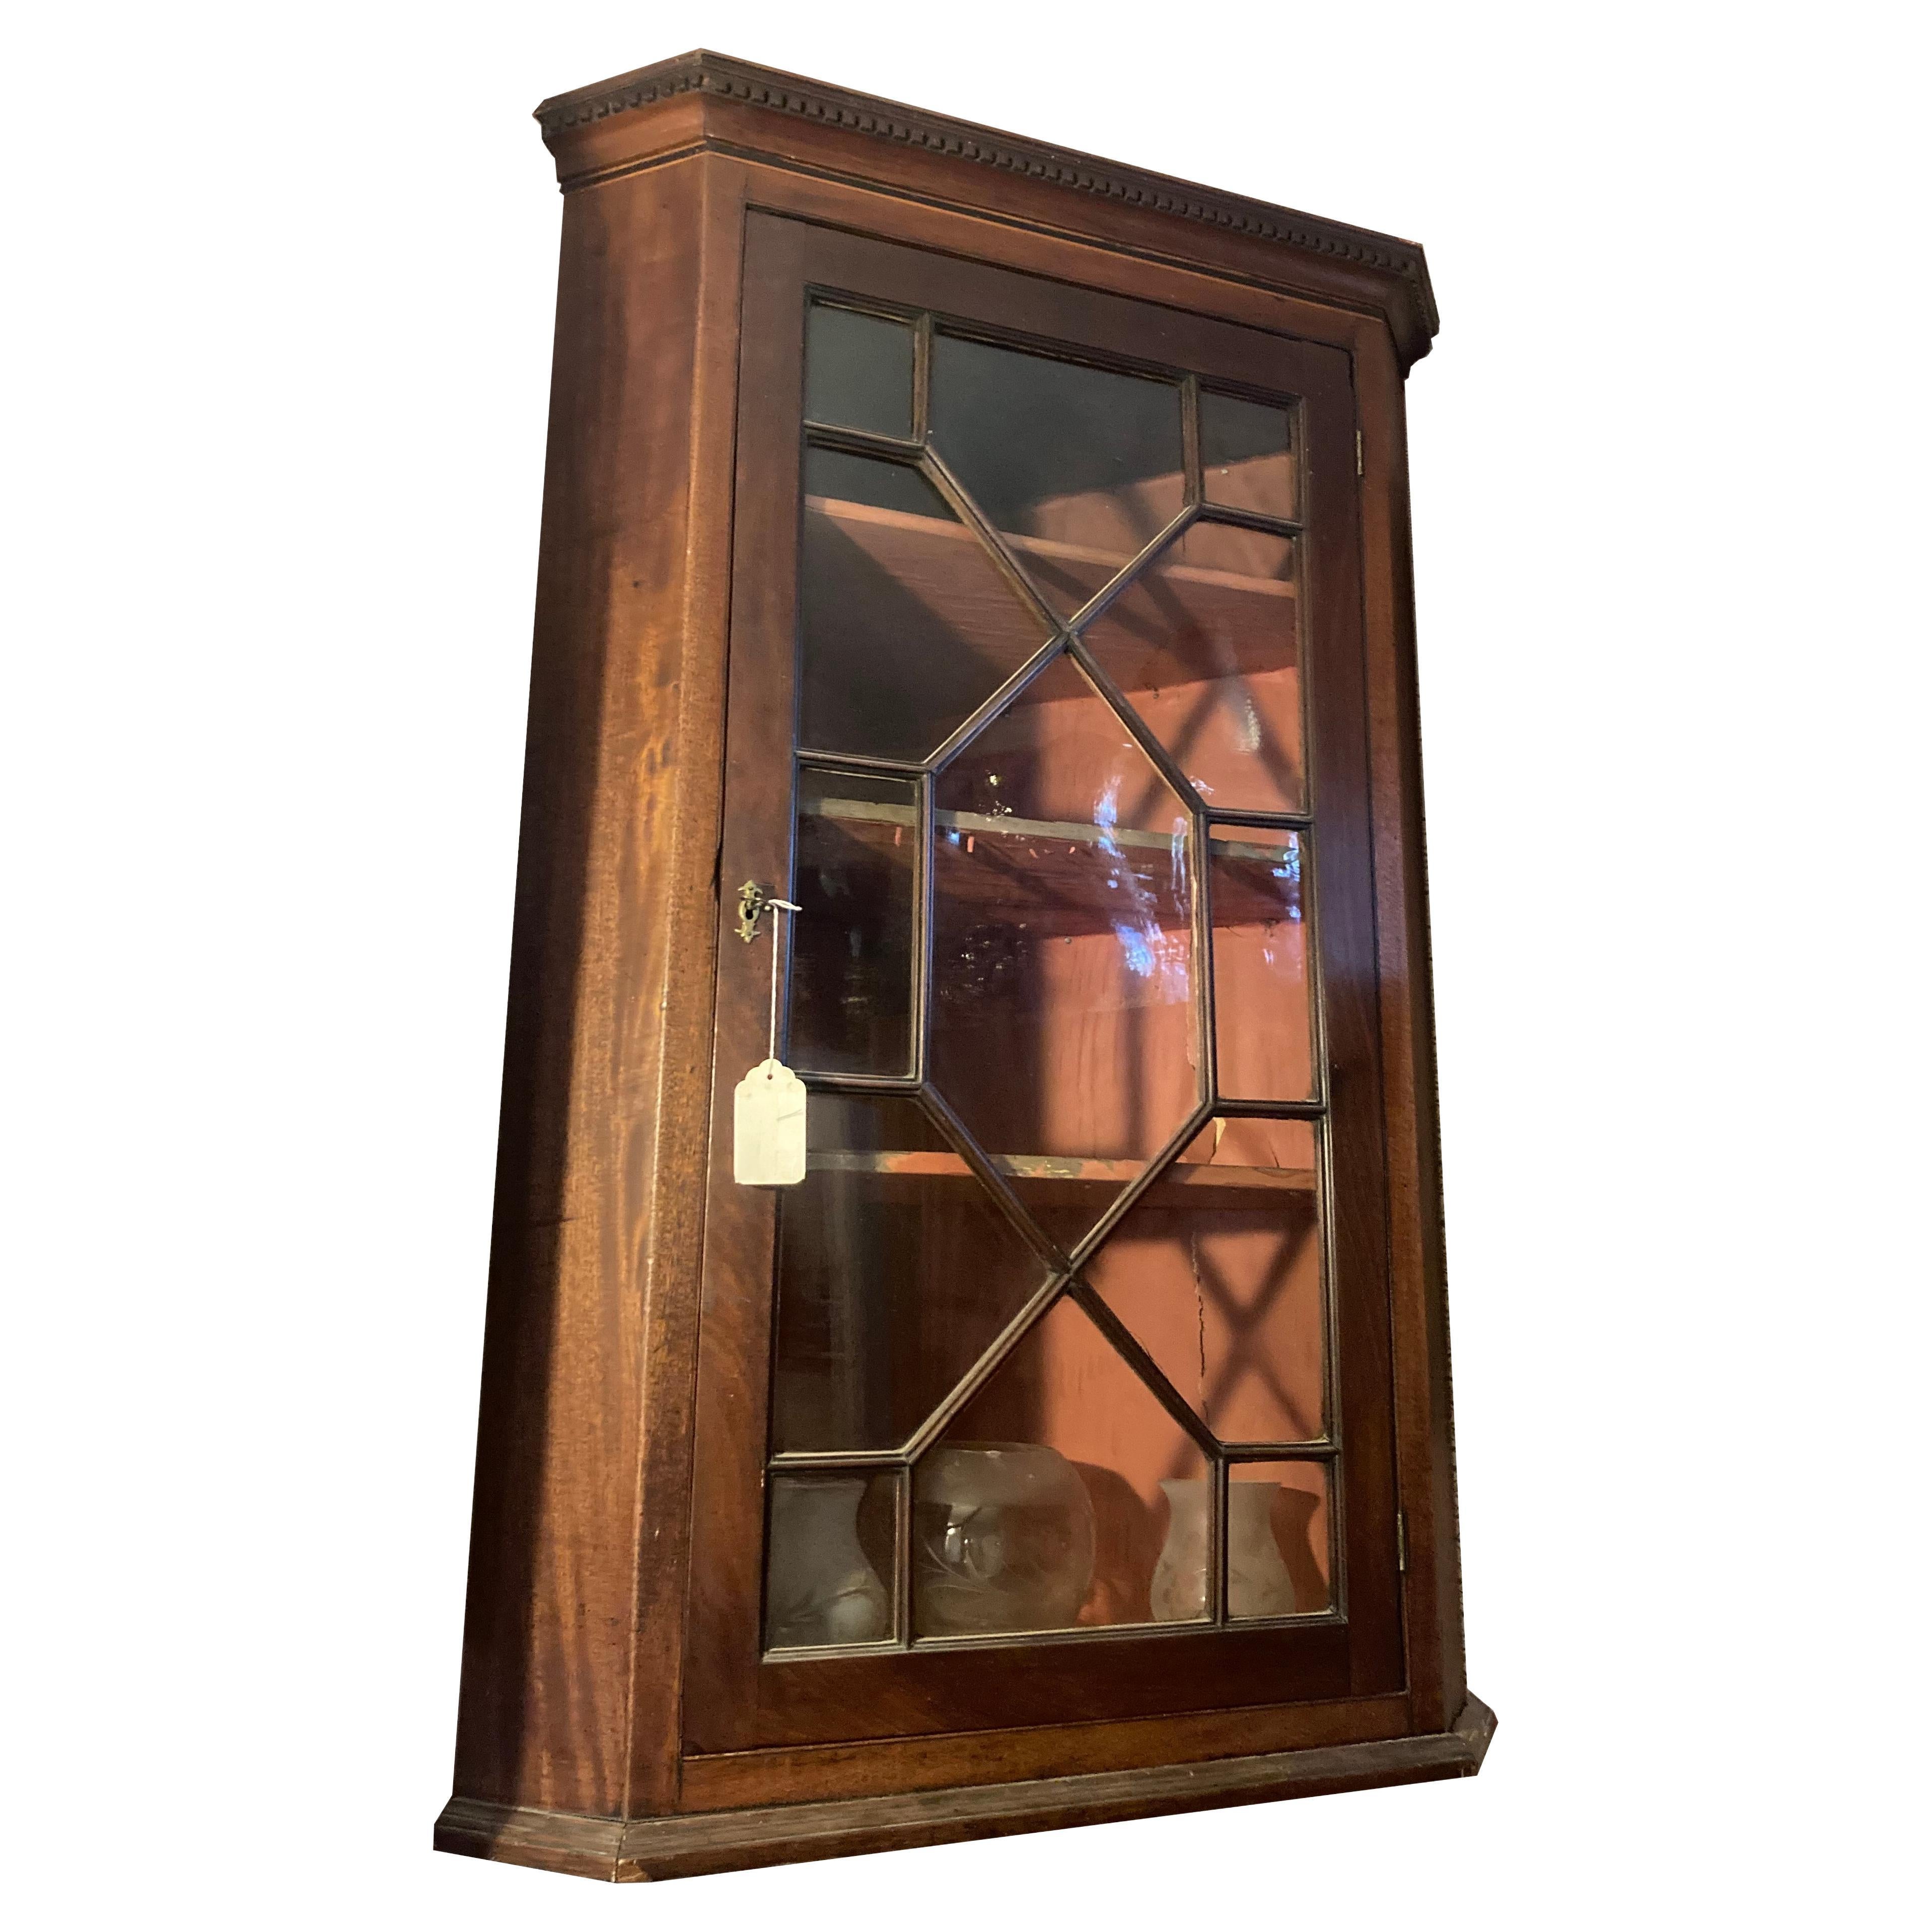 George III mahogany hanging corner cupboard circa 1790.

Small scale hanging cupboard with dentil molding at crown and good door design.

This cupboard measures 41 inches tall by 27 inches wide by 19 inches deep.